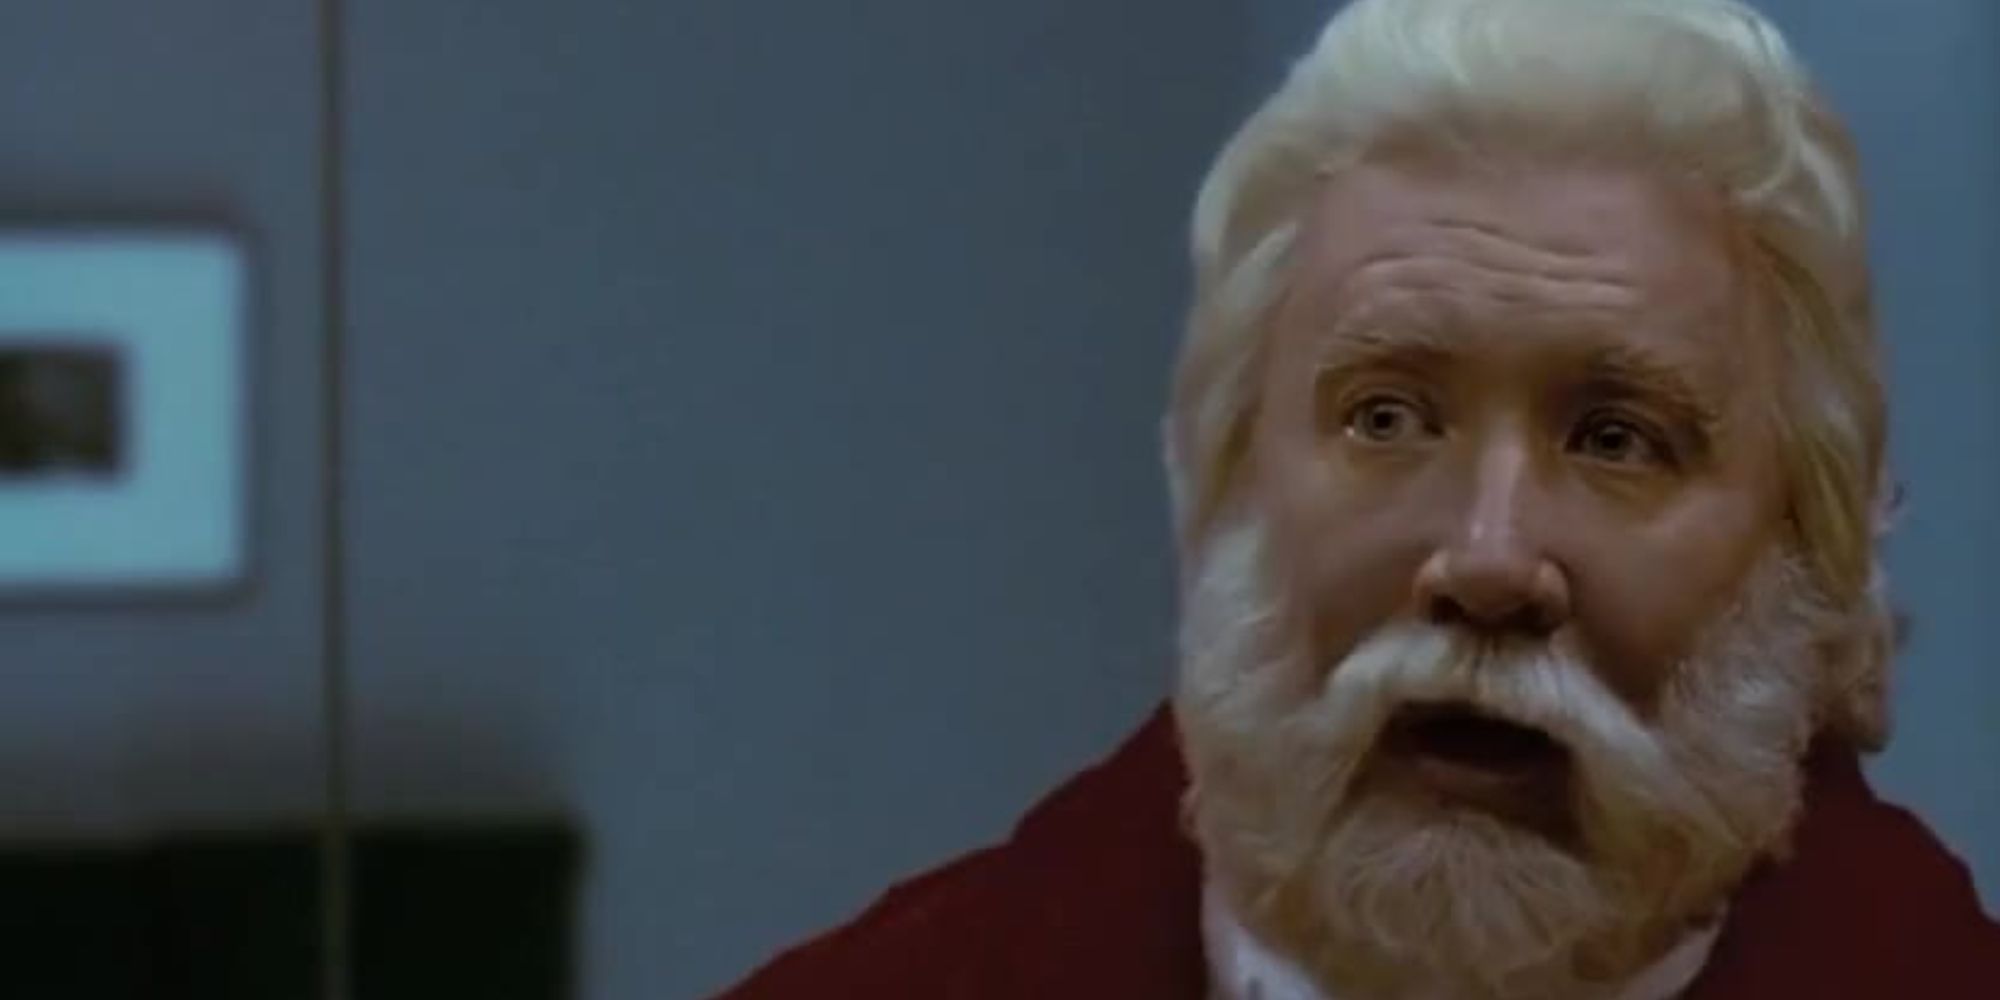 Scott looks at his beard in the mirror in The Santa Clause